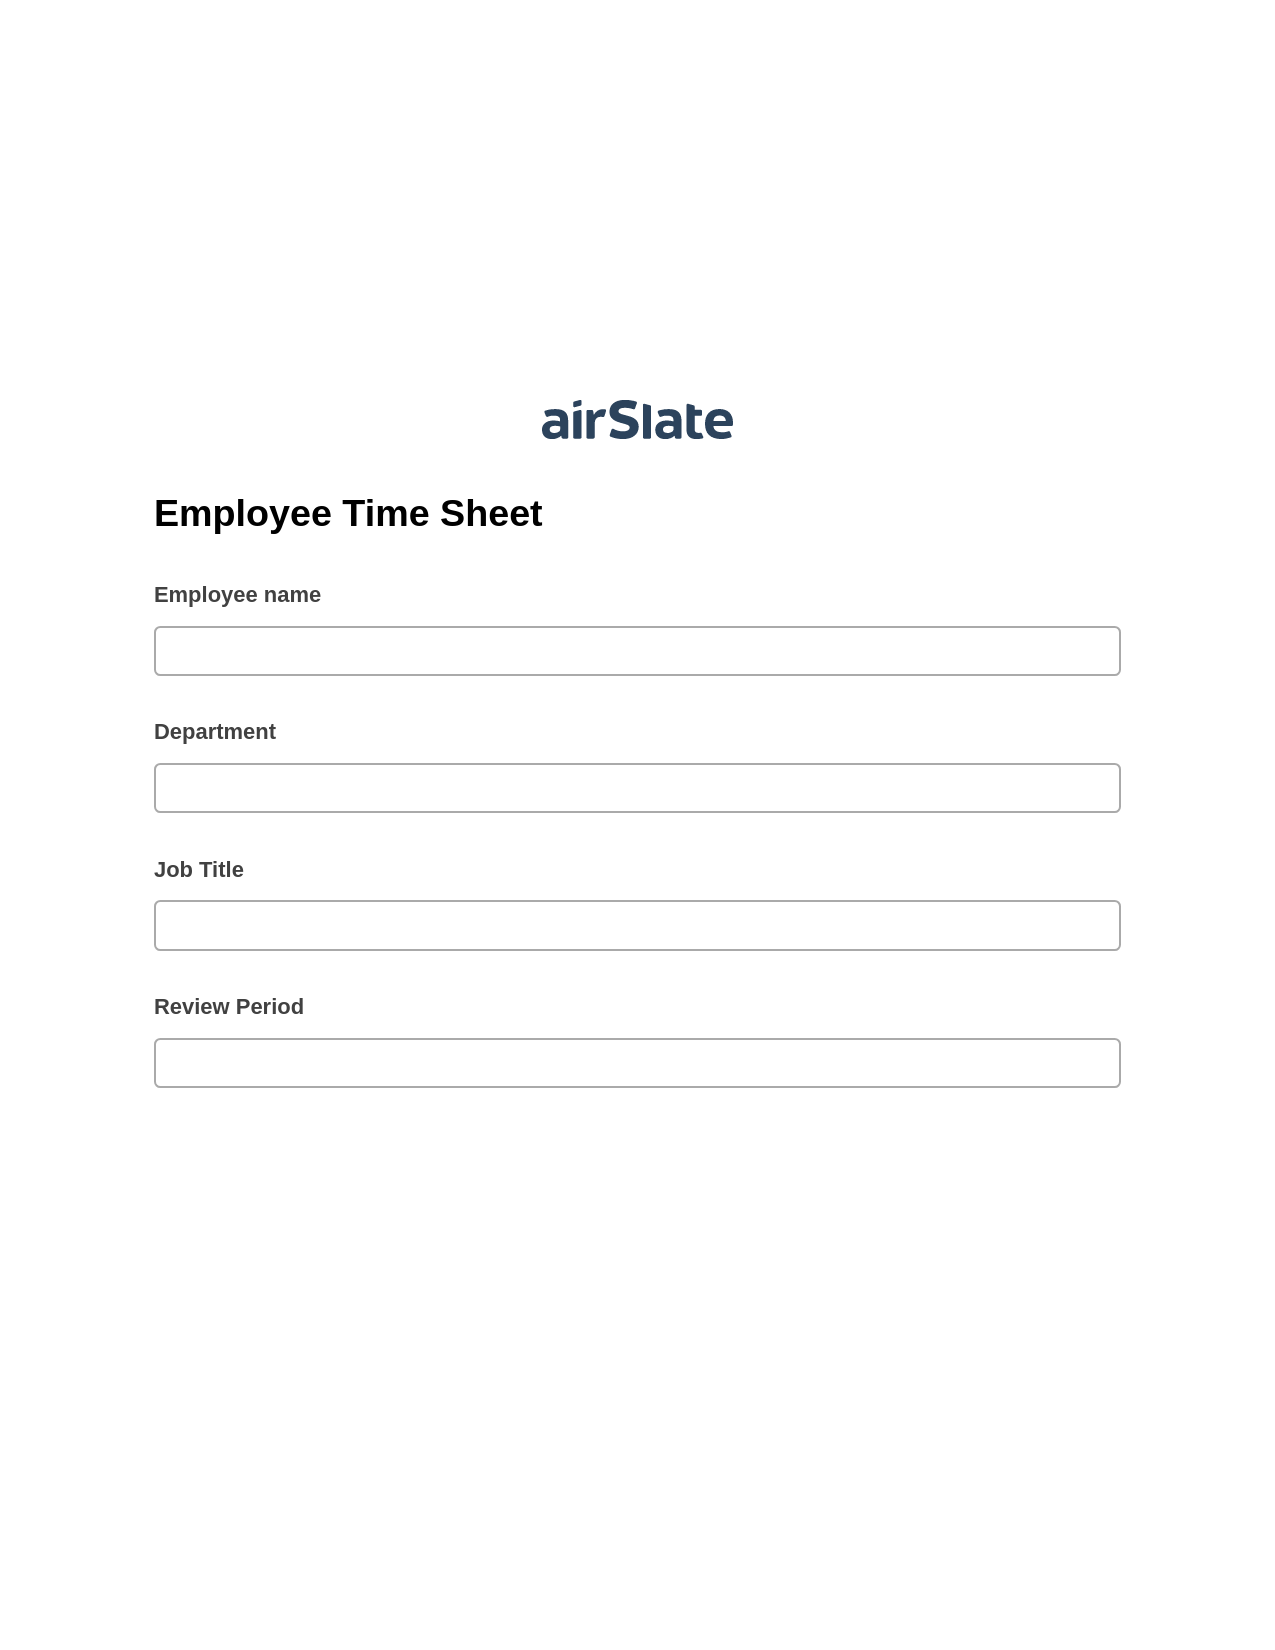 Employee Time Sheet Pre-fill Dropdowns from Excel Bot, Jira Bot, Archive to SharePoint Folder Bot